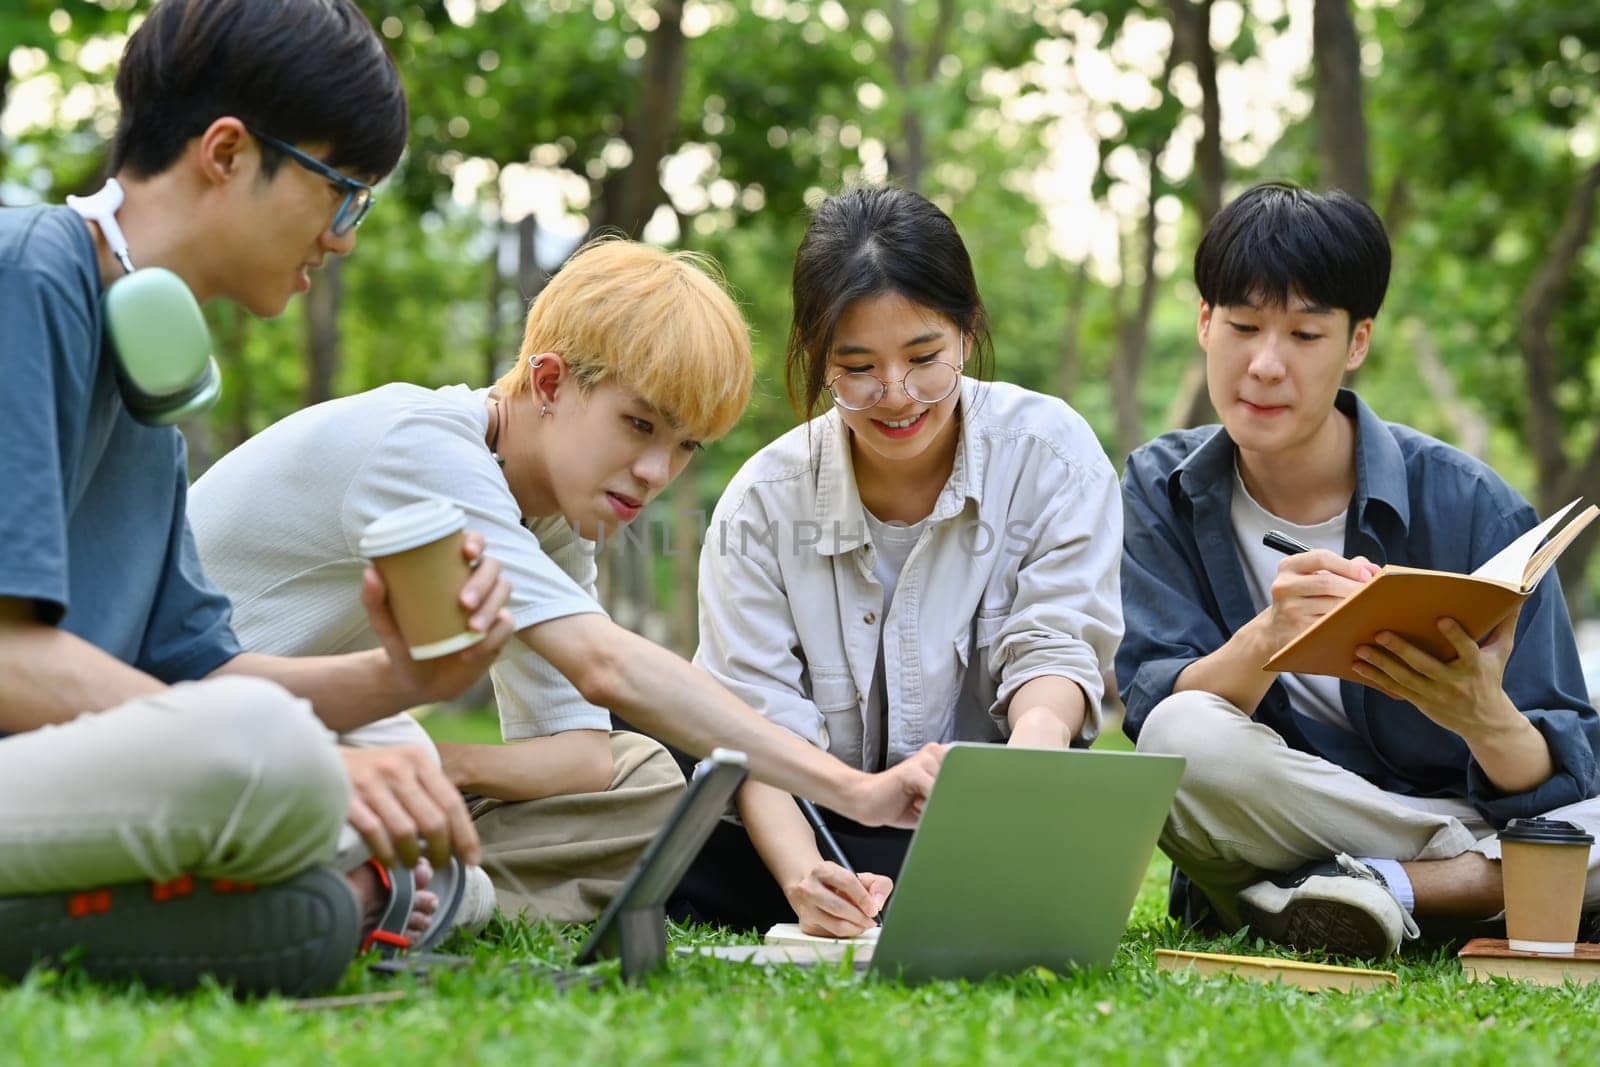 Gen Z friends university students reading book, working on group project at campus. Education and youth lifestyle concept.